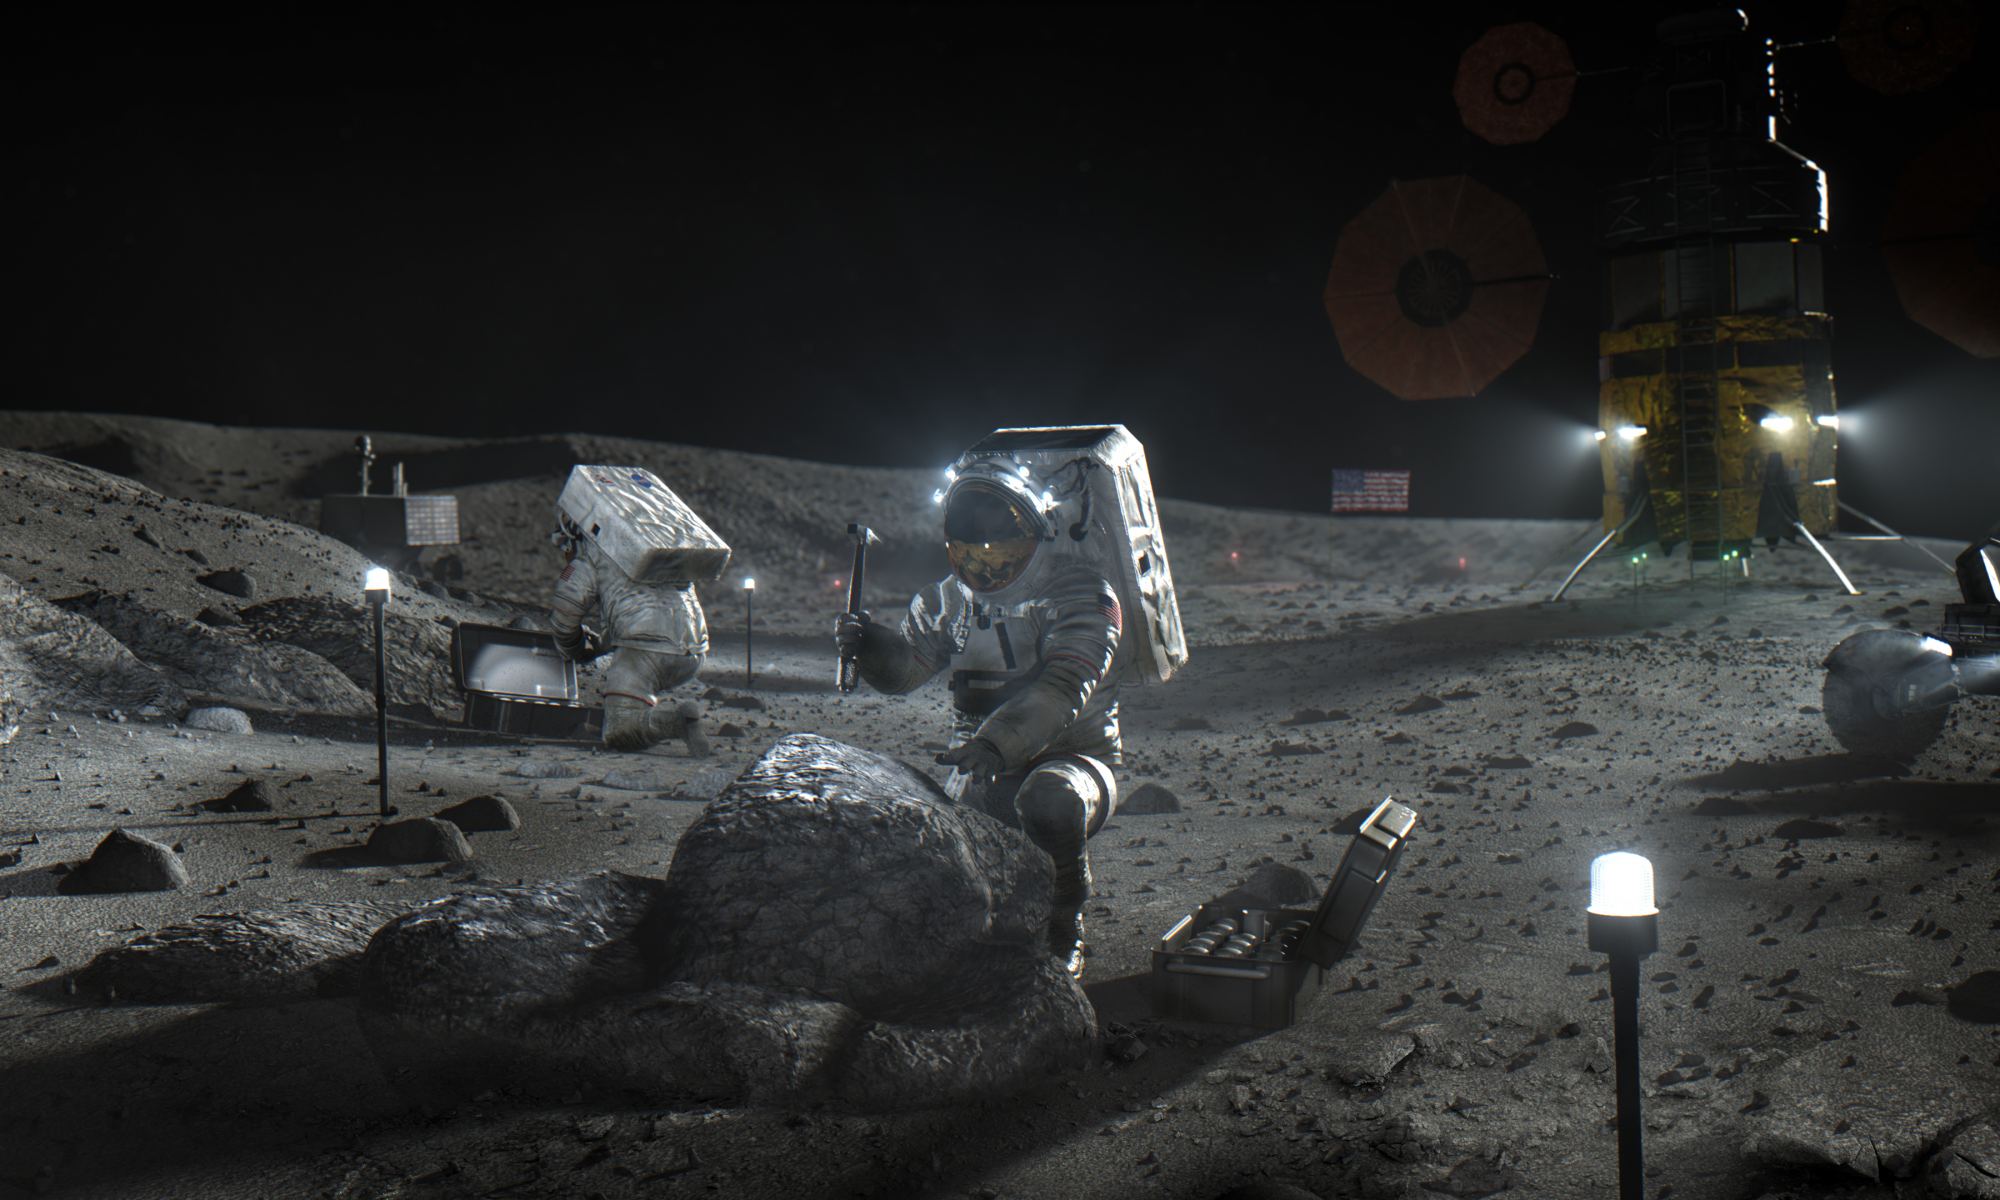 Artist's impression of astronauts on the lunar surface, as part of the Artemis Program. Can VR help prepare astronauts for their missions? Credit: NASA